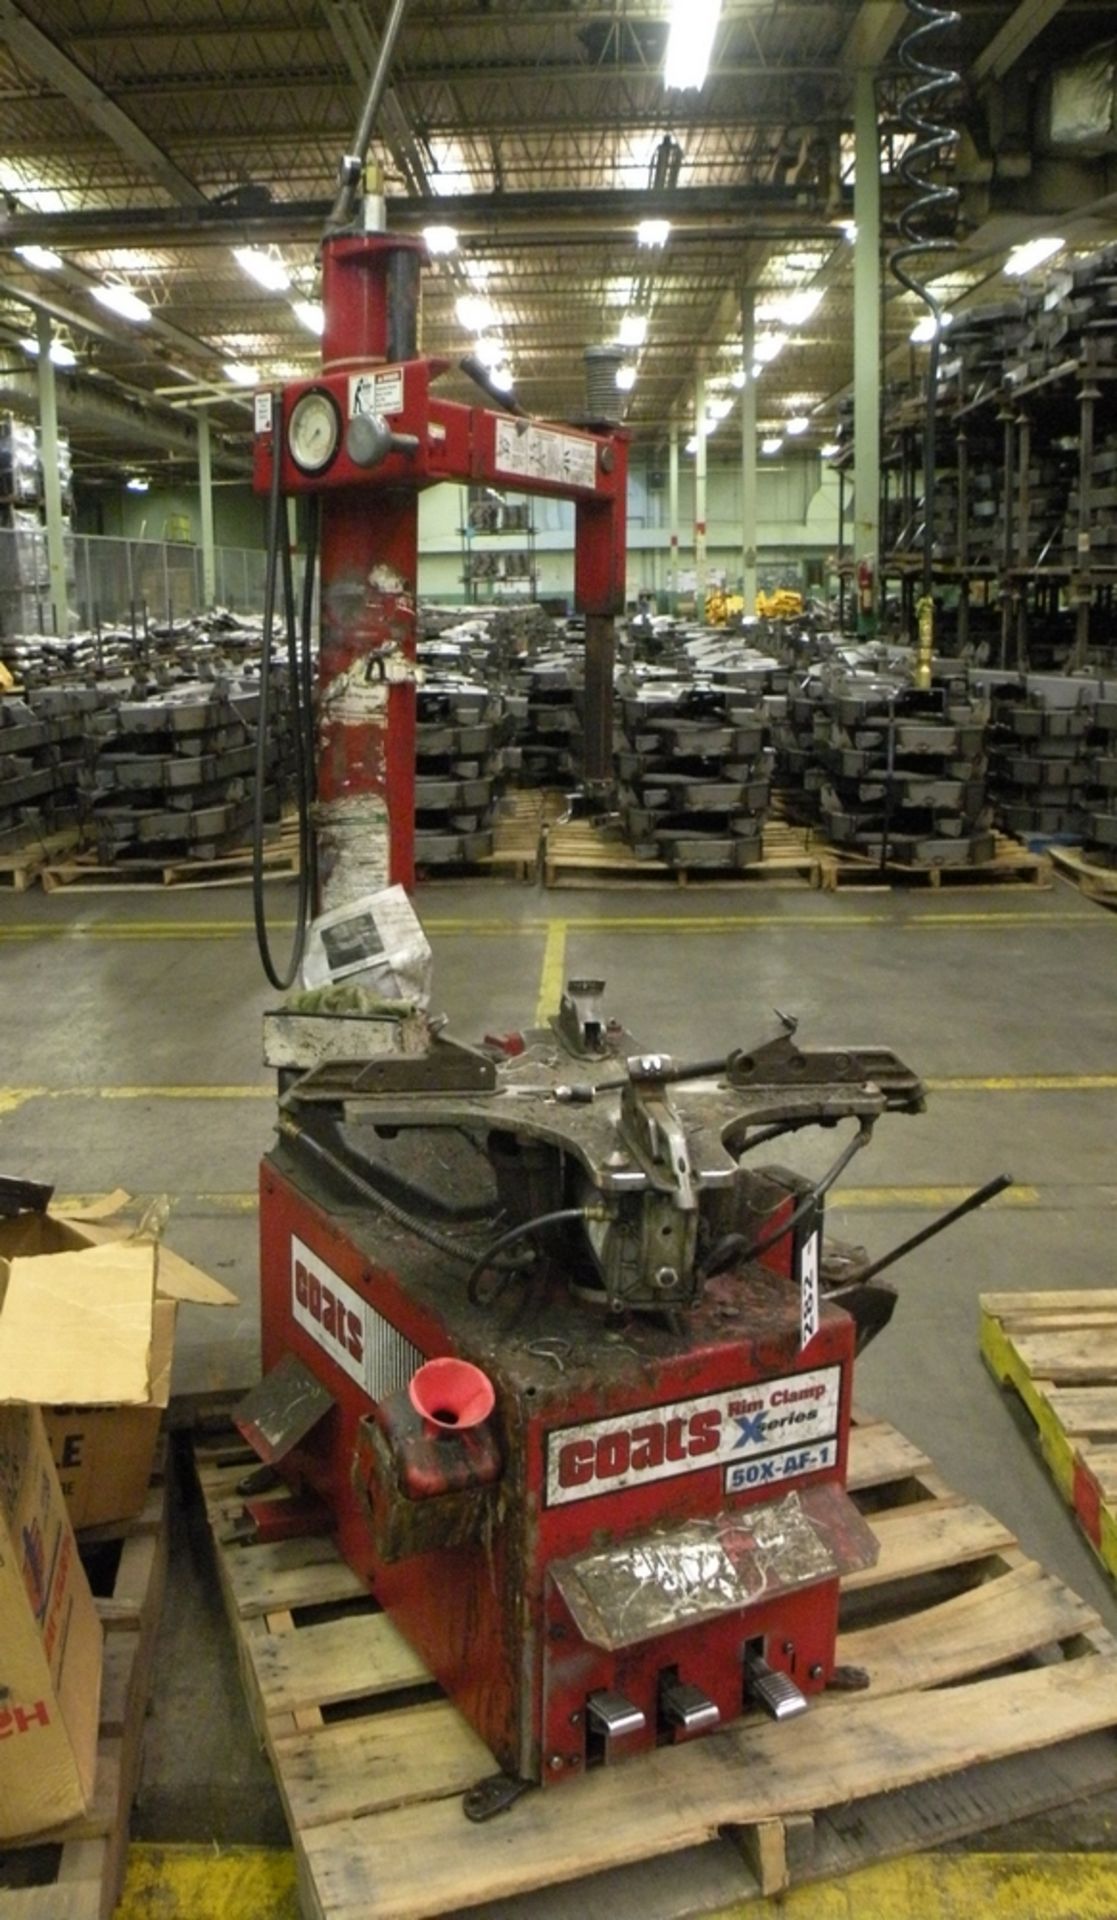 Coats Rim Clamp X Series Tire Changer, Mdl 50X-AF-1, more... (Martin TN) - Image 2 of 2